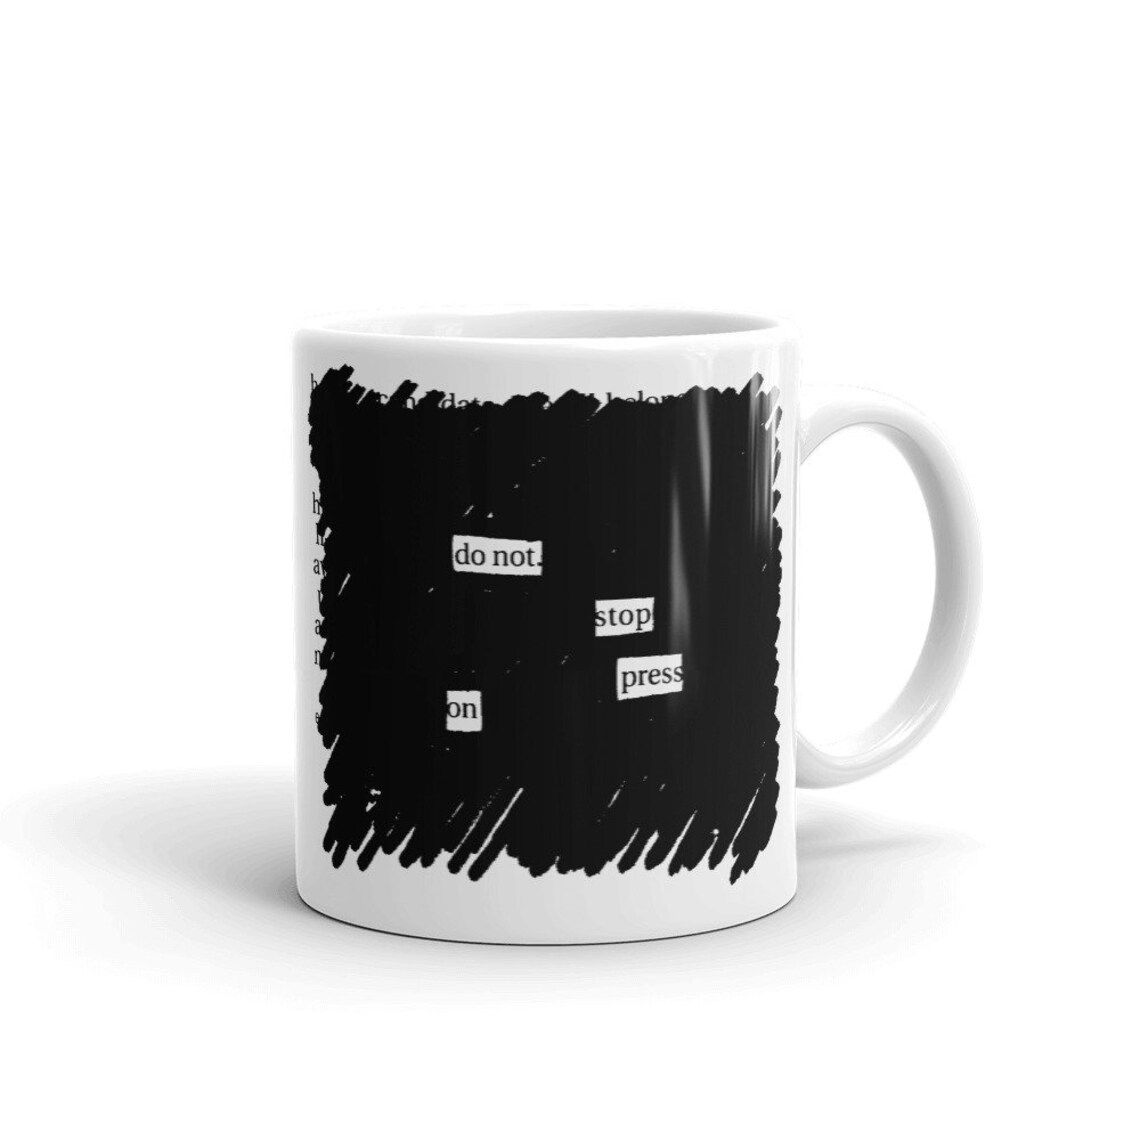 image of blackout poetry coffee mug, poem reads "do not stop press on"